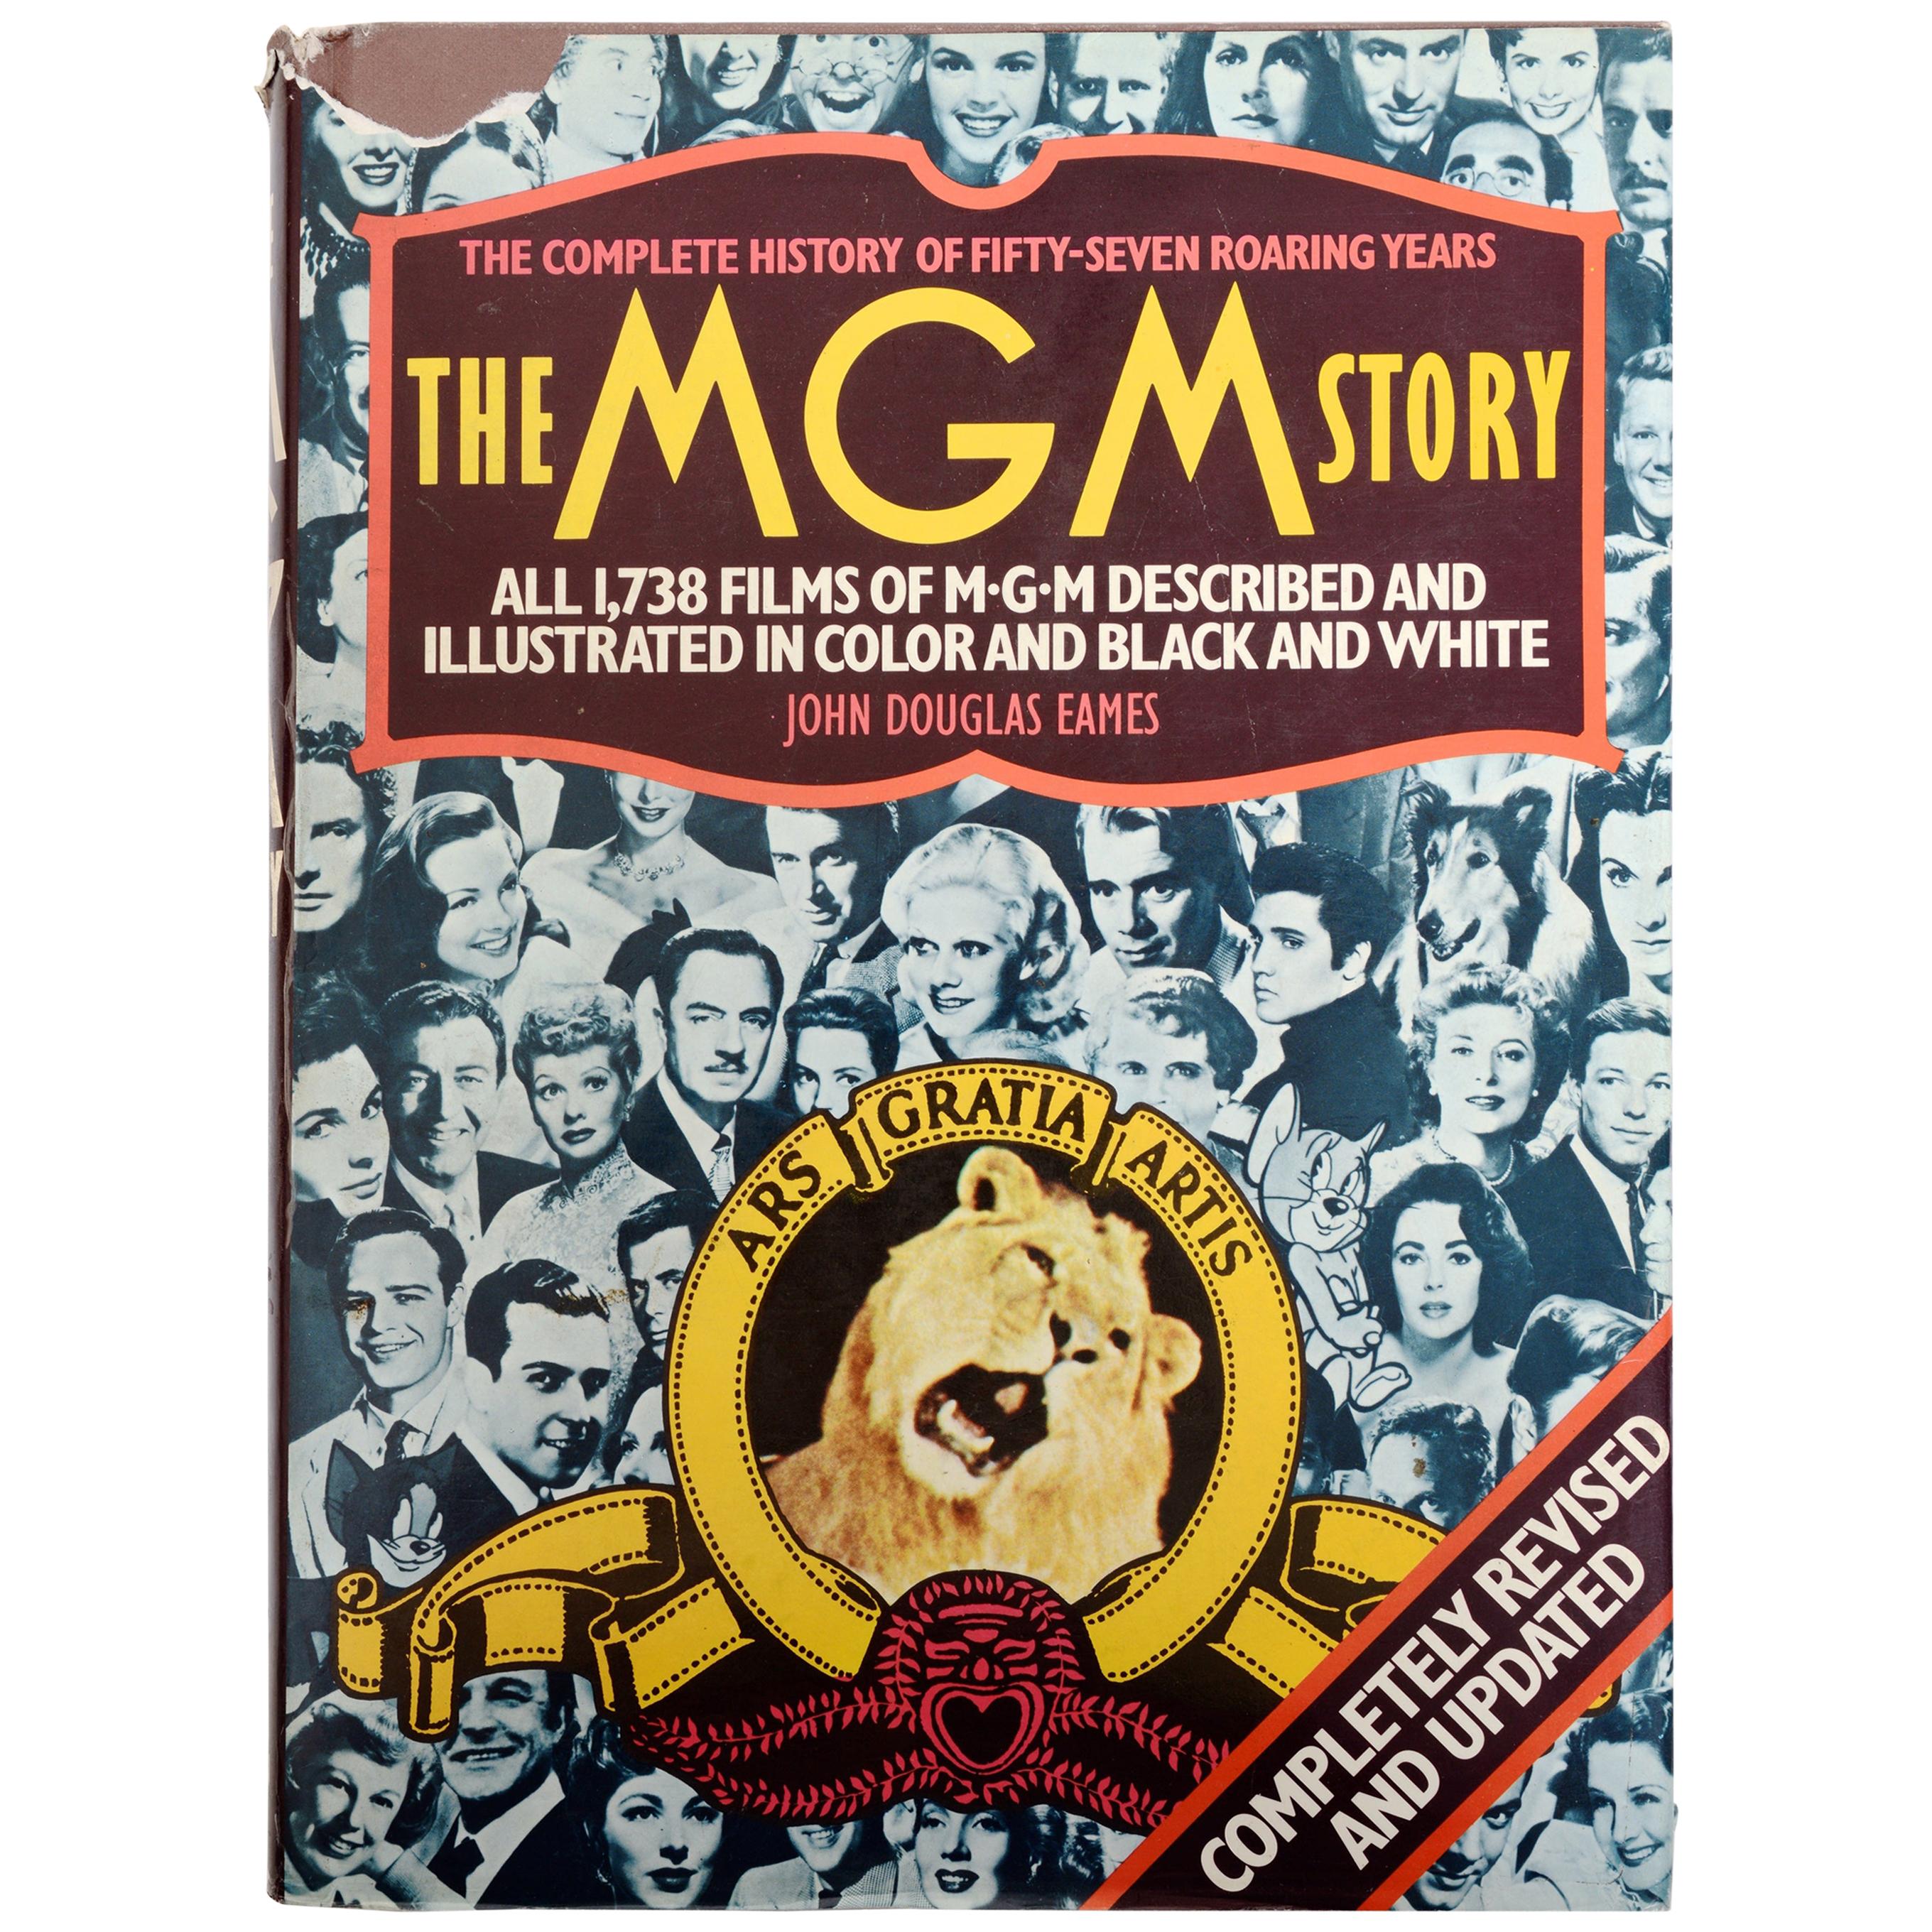 The MGM Story The Complete History of Fifty Roaring Years, von John Eames